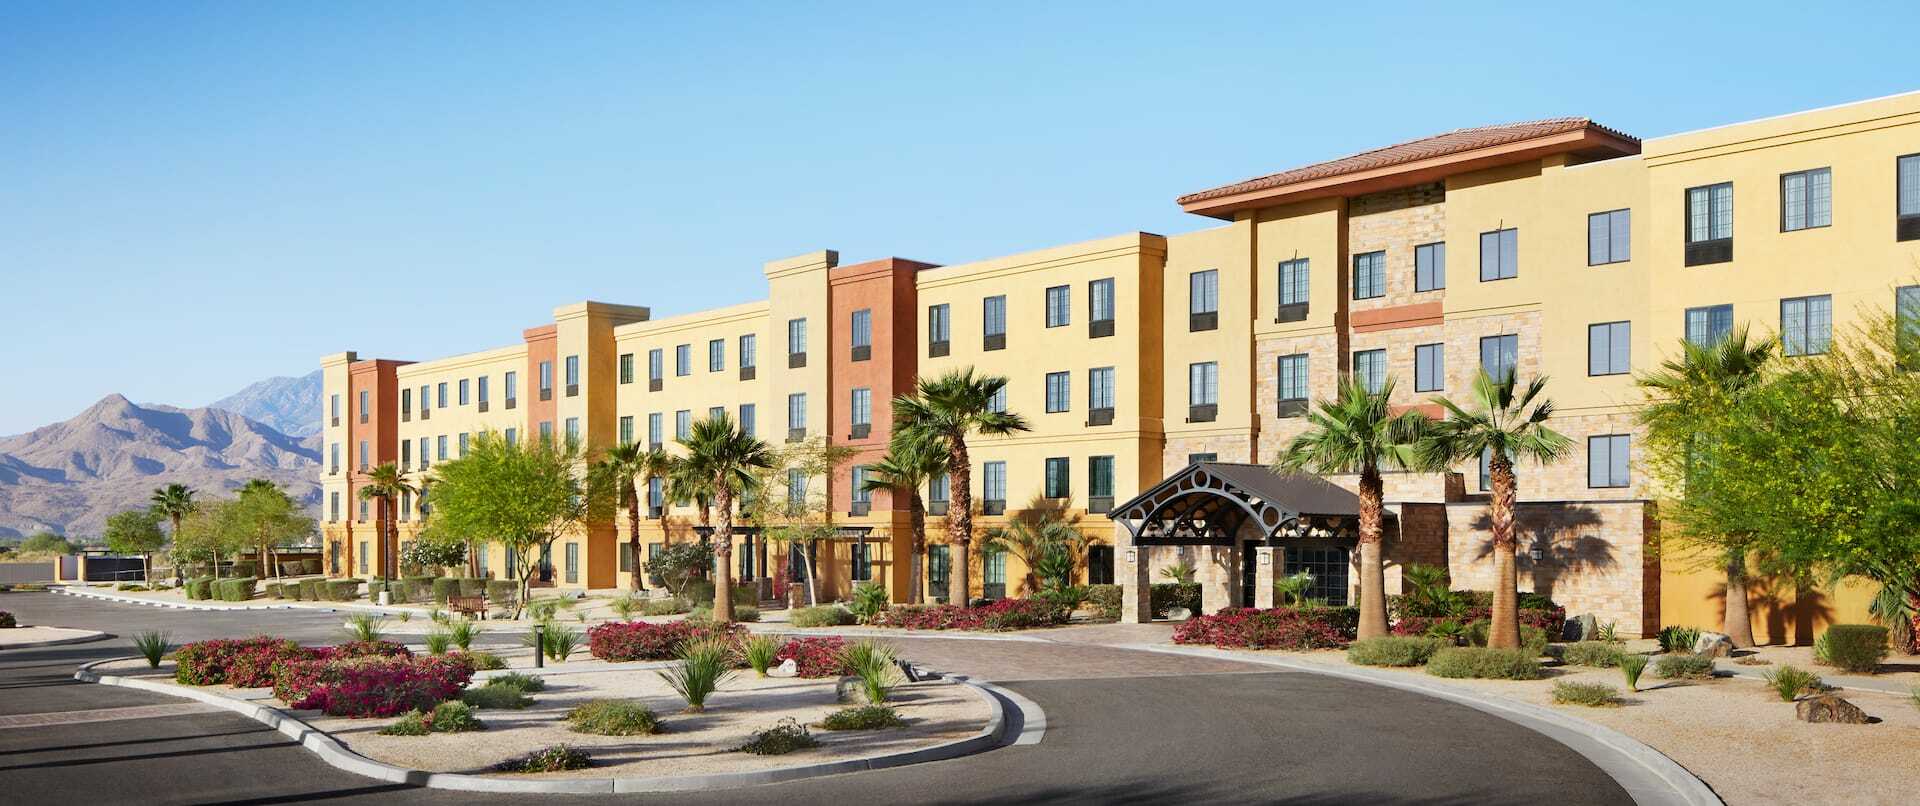 Photo of Homewood Suites by Hilton Cathedral City Palm Springs, Cathedral City, CA